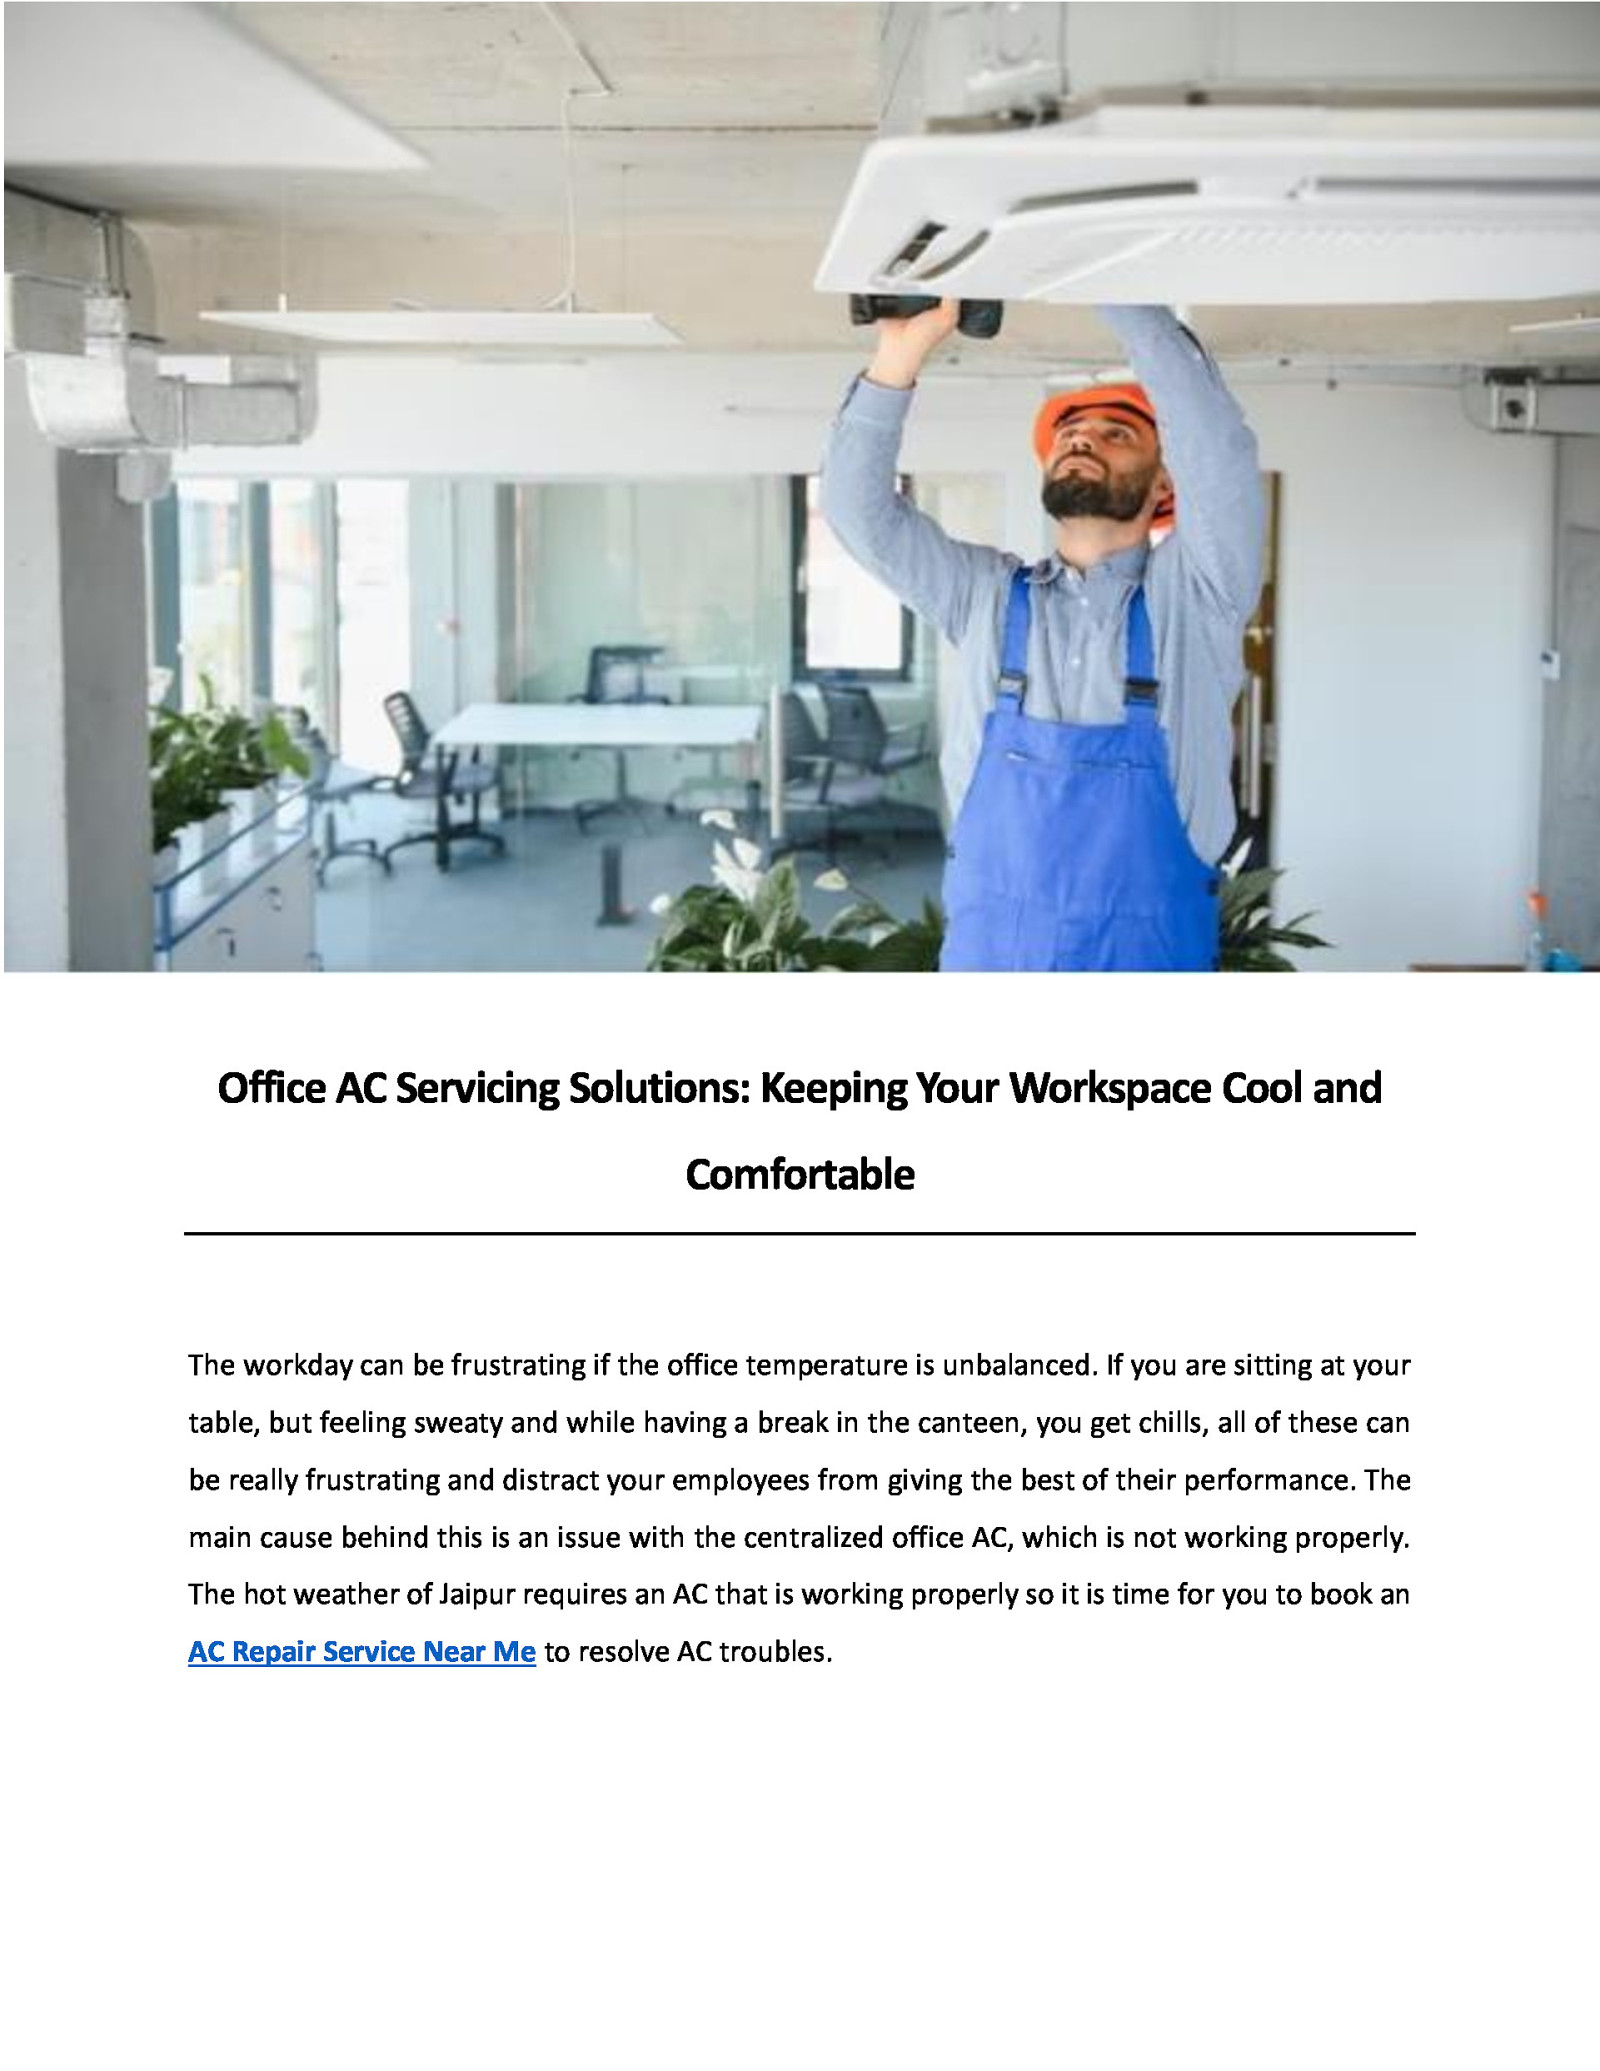 Office AC Servicing Solutions: Keeping Your Workspace Cool and Comfortable